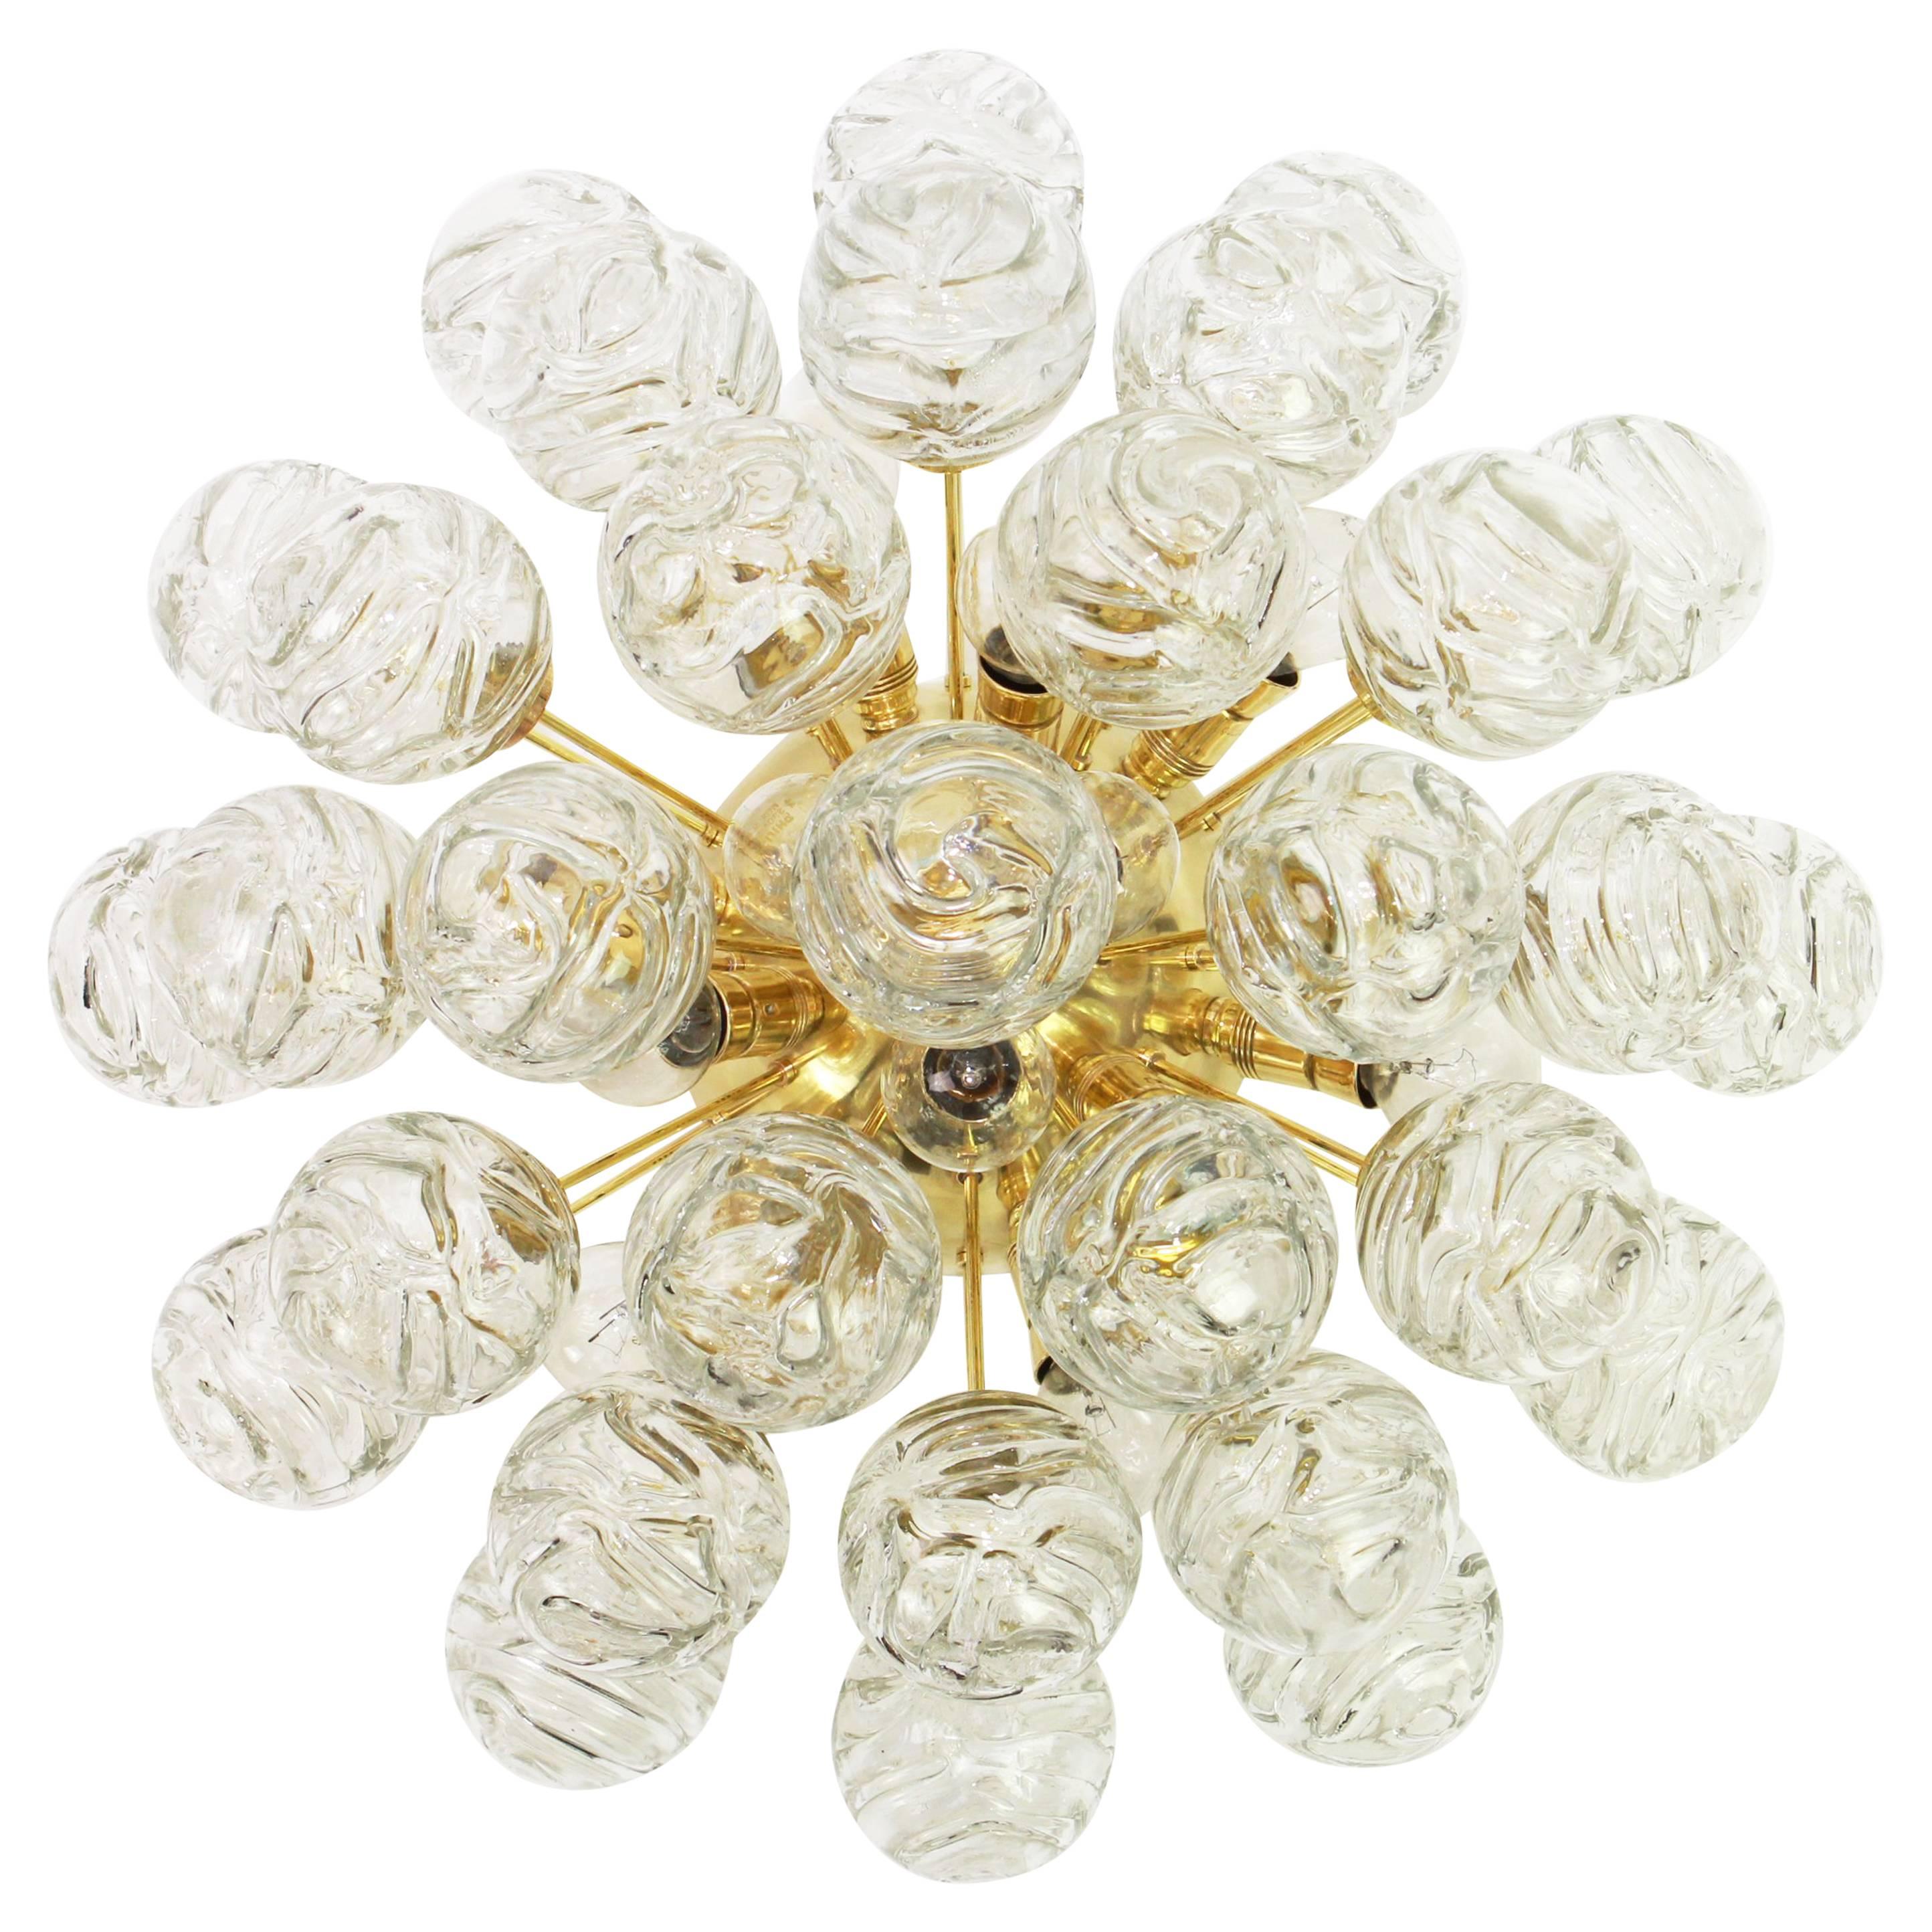 Spectacular Sputnik flushmount with glass snowballs designed by Doria, Germany, 1970s
All glass balls are in good condition.
It needs 12 small size bulbs (E-14 bulbs) up to 40 watts each 
Light bulbs are not included. It is possible to install